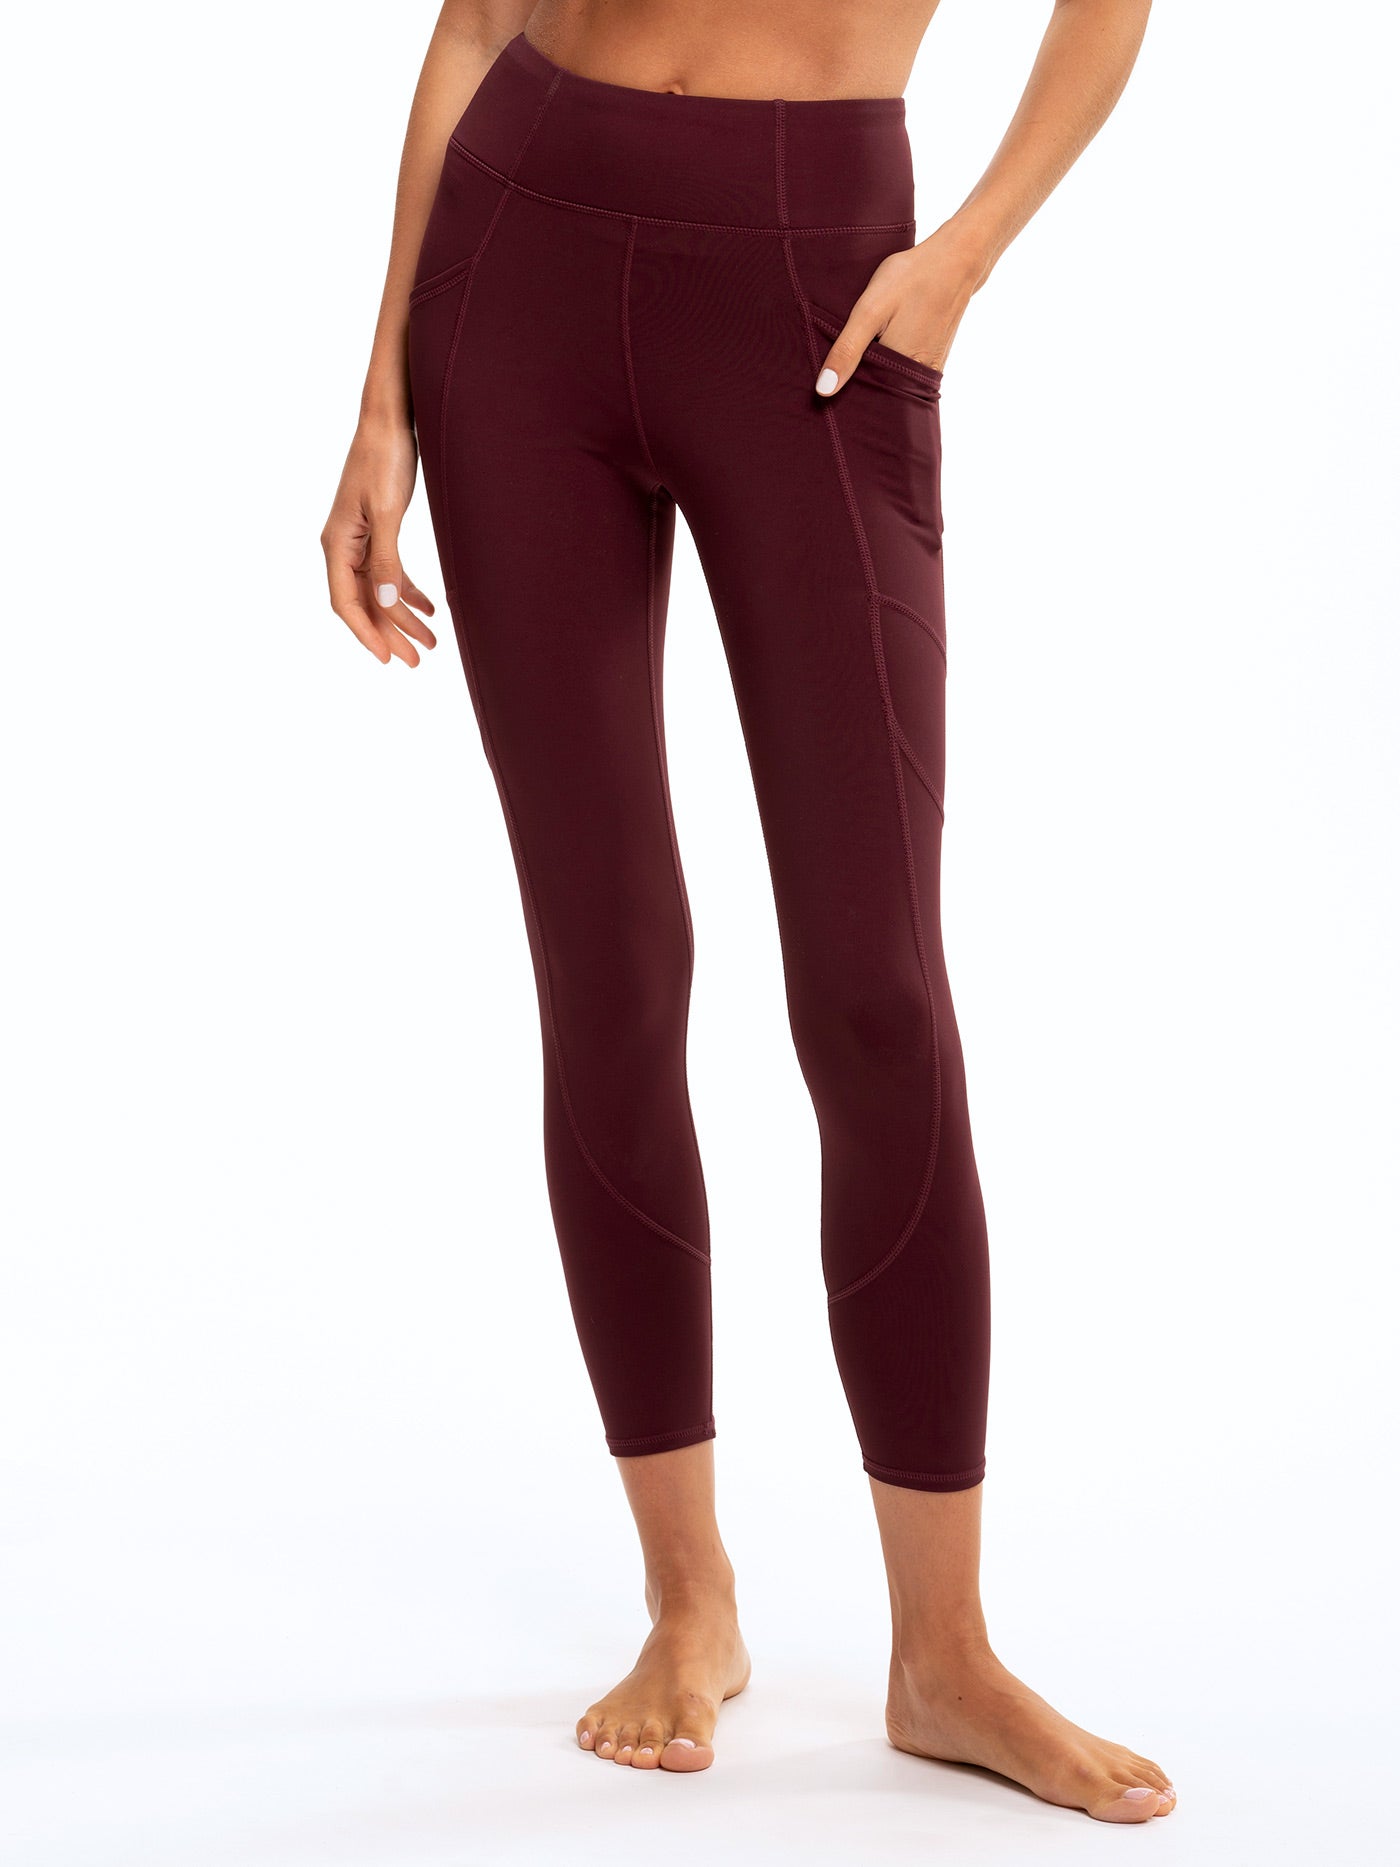 Leggings- All Over Cuts - 4TheWild